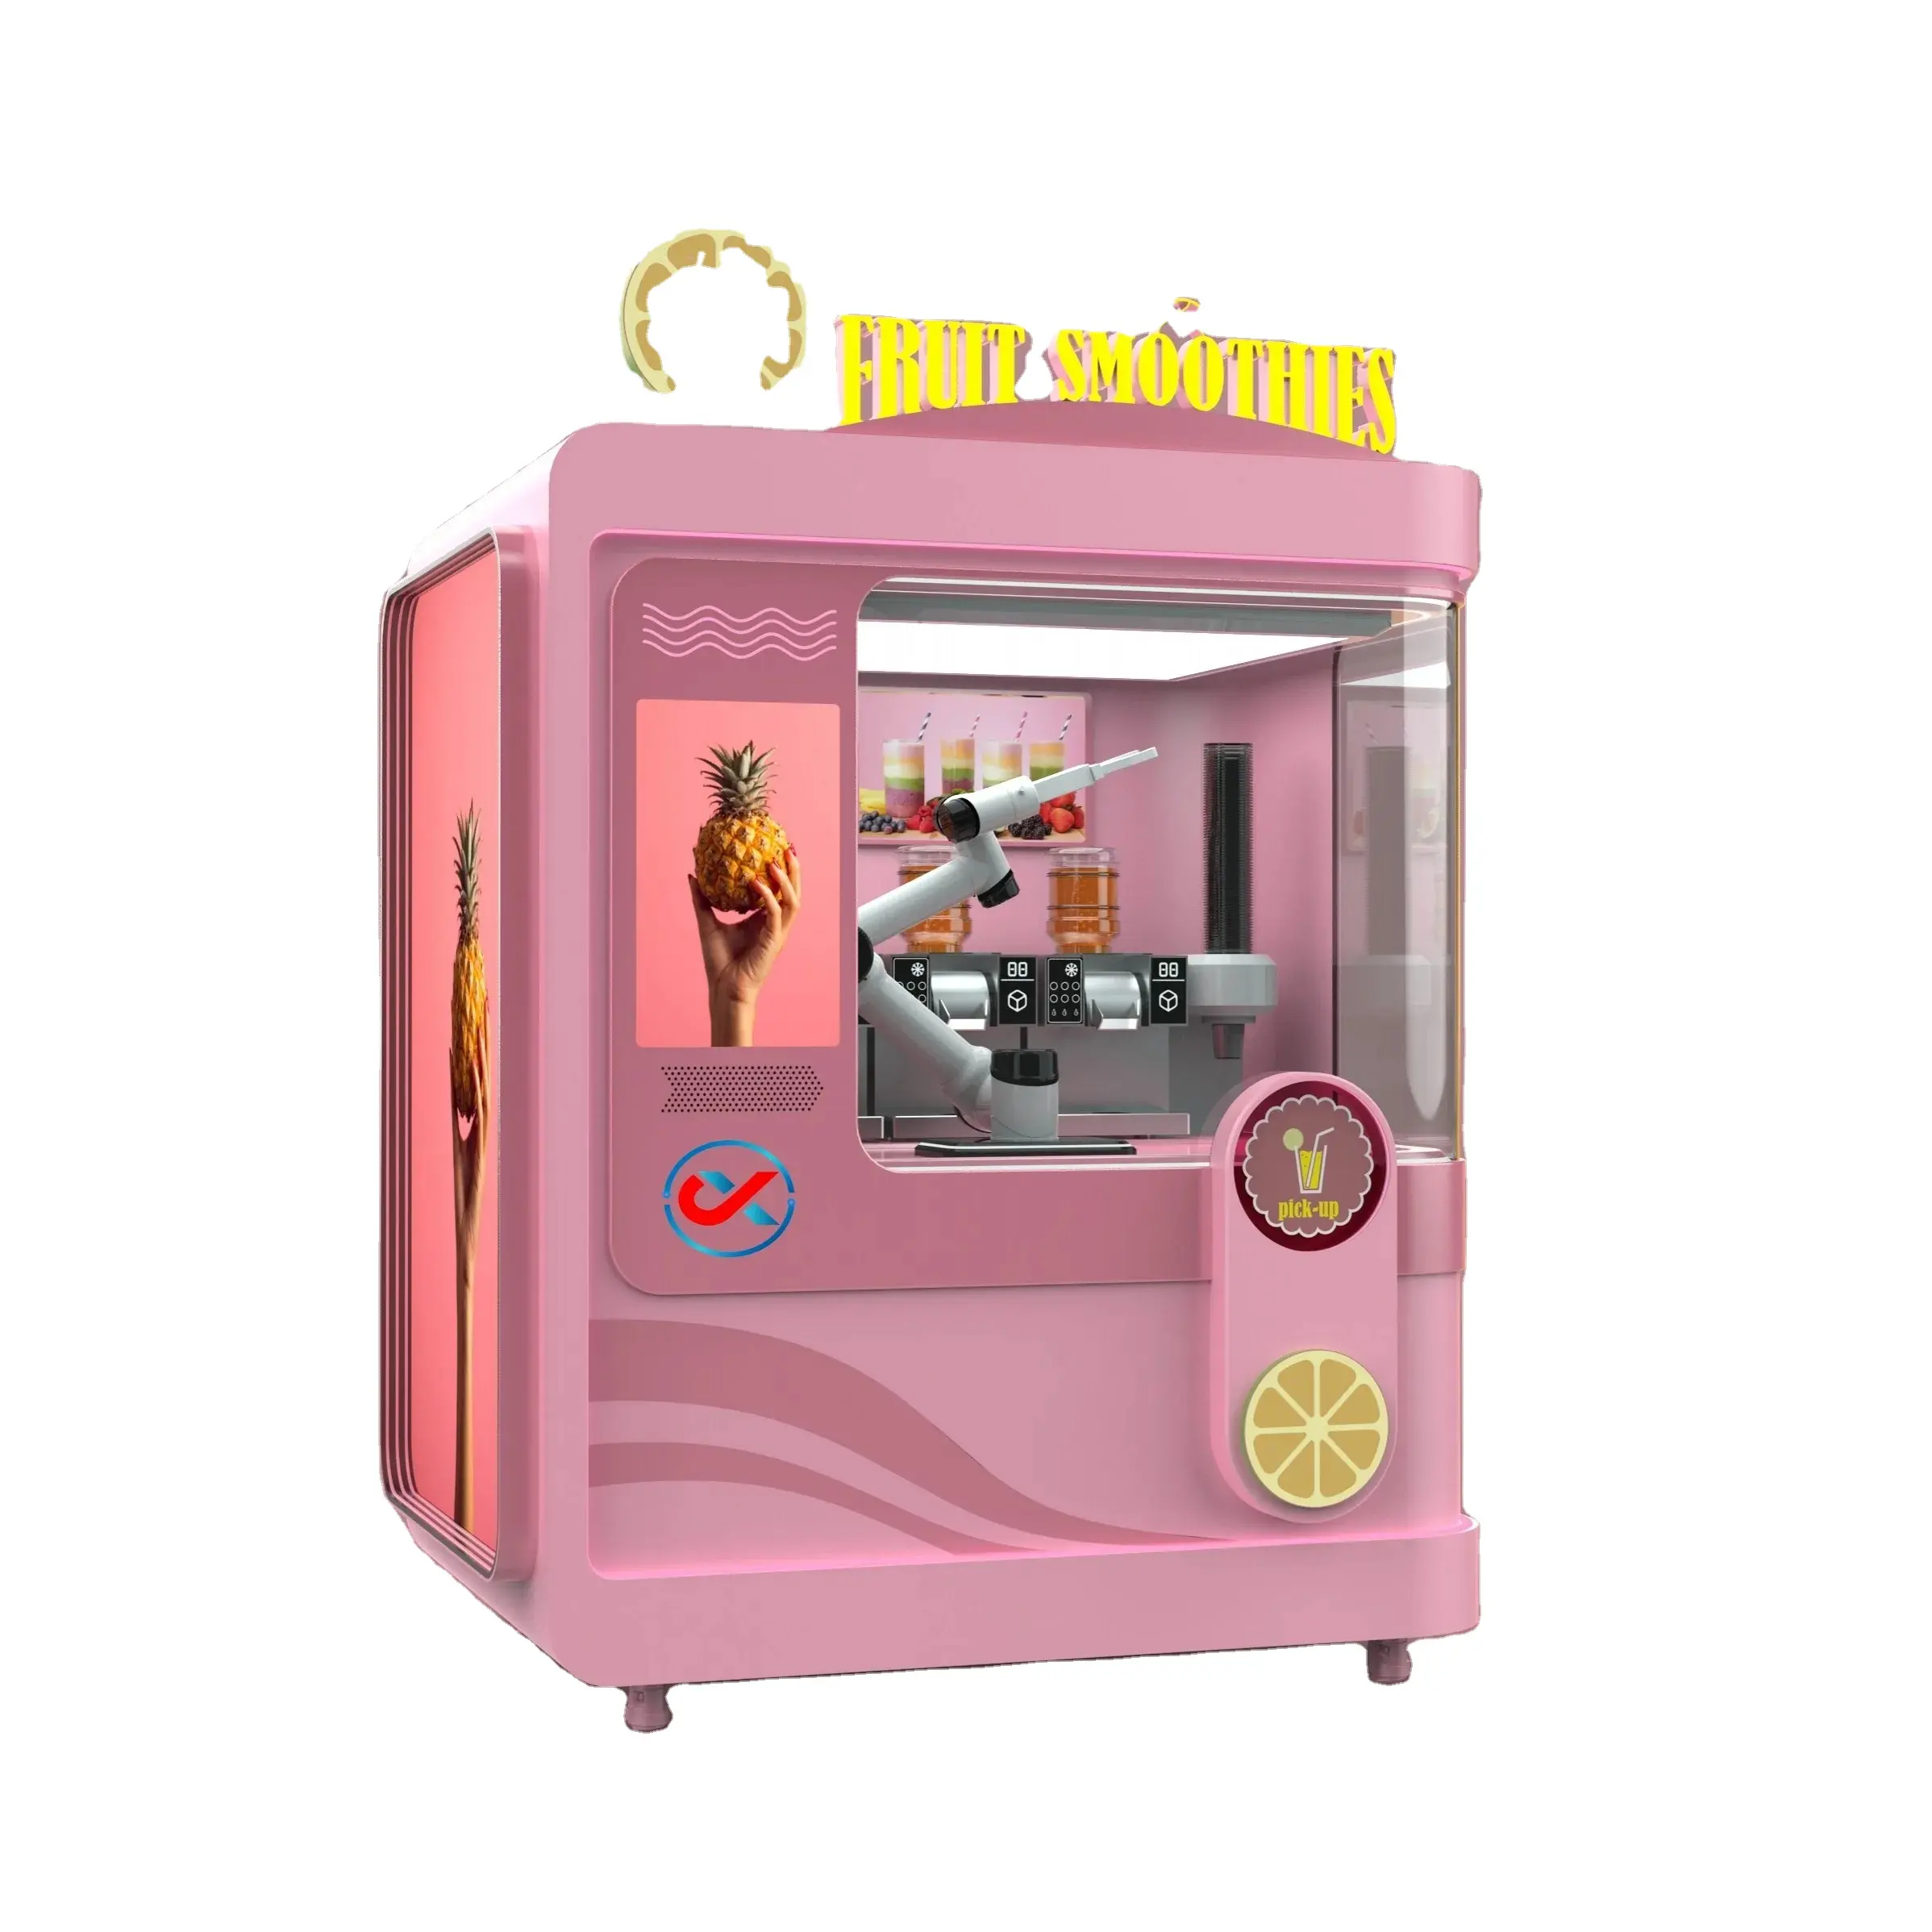 Fully Automatic with LCD Touch Screen fruit slush Kiosk Robotice Arm smoothie Vending Machine